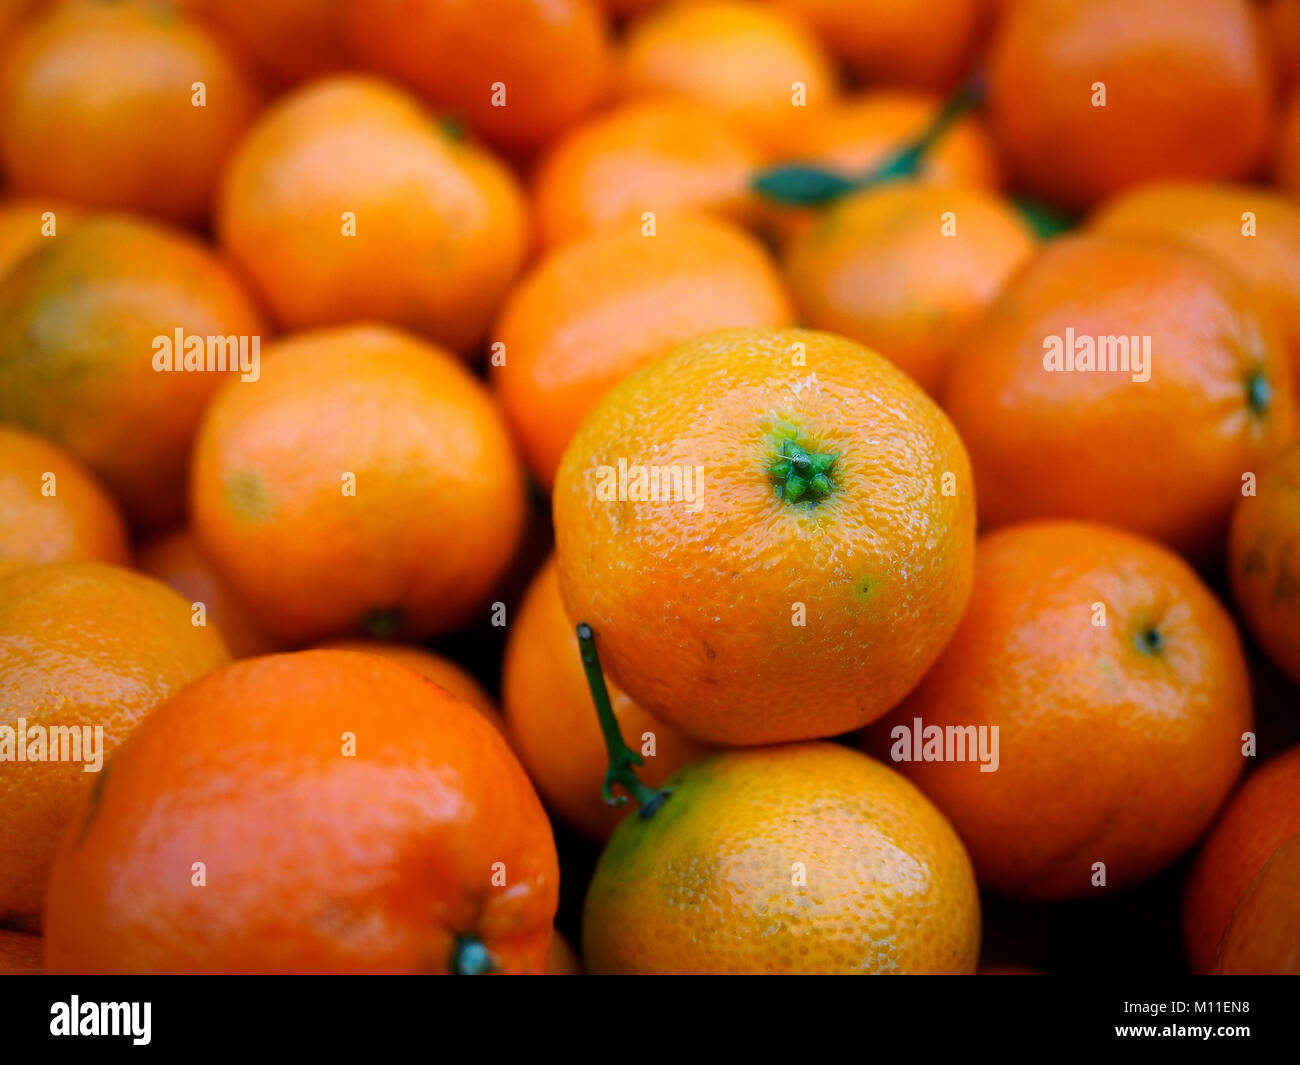 Street food market. A stand full of fresh tangerines. Stock Photo